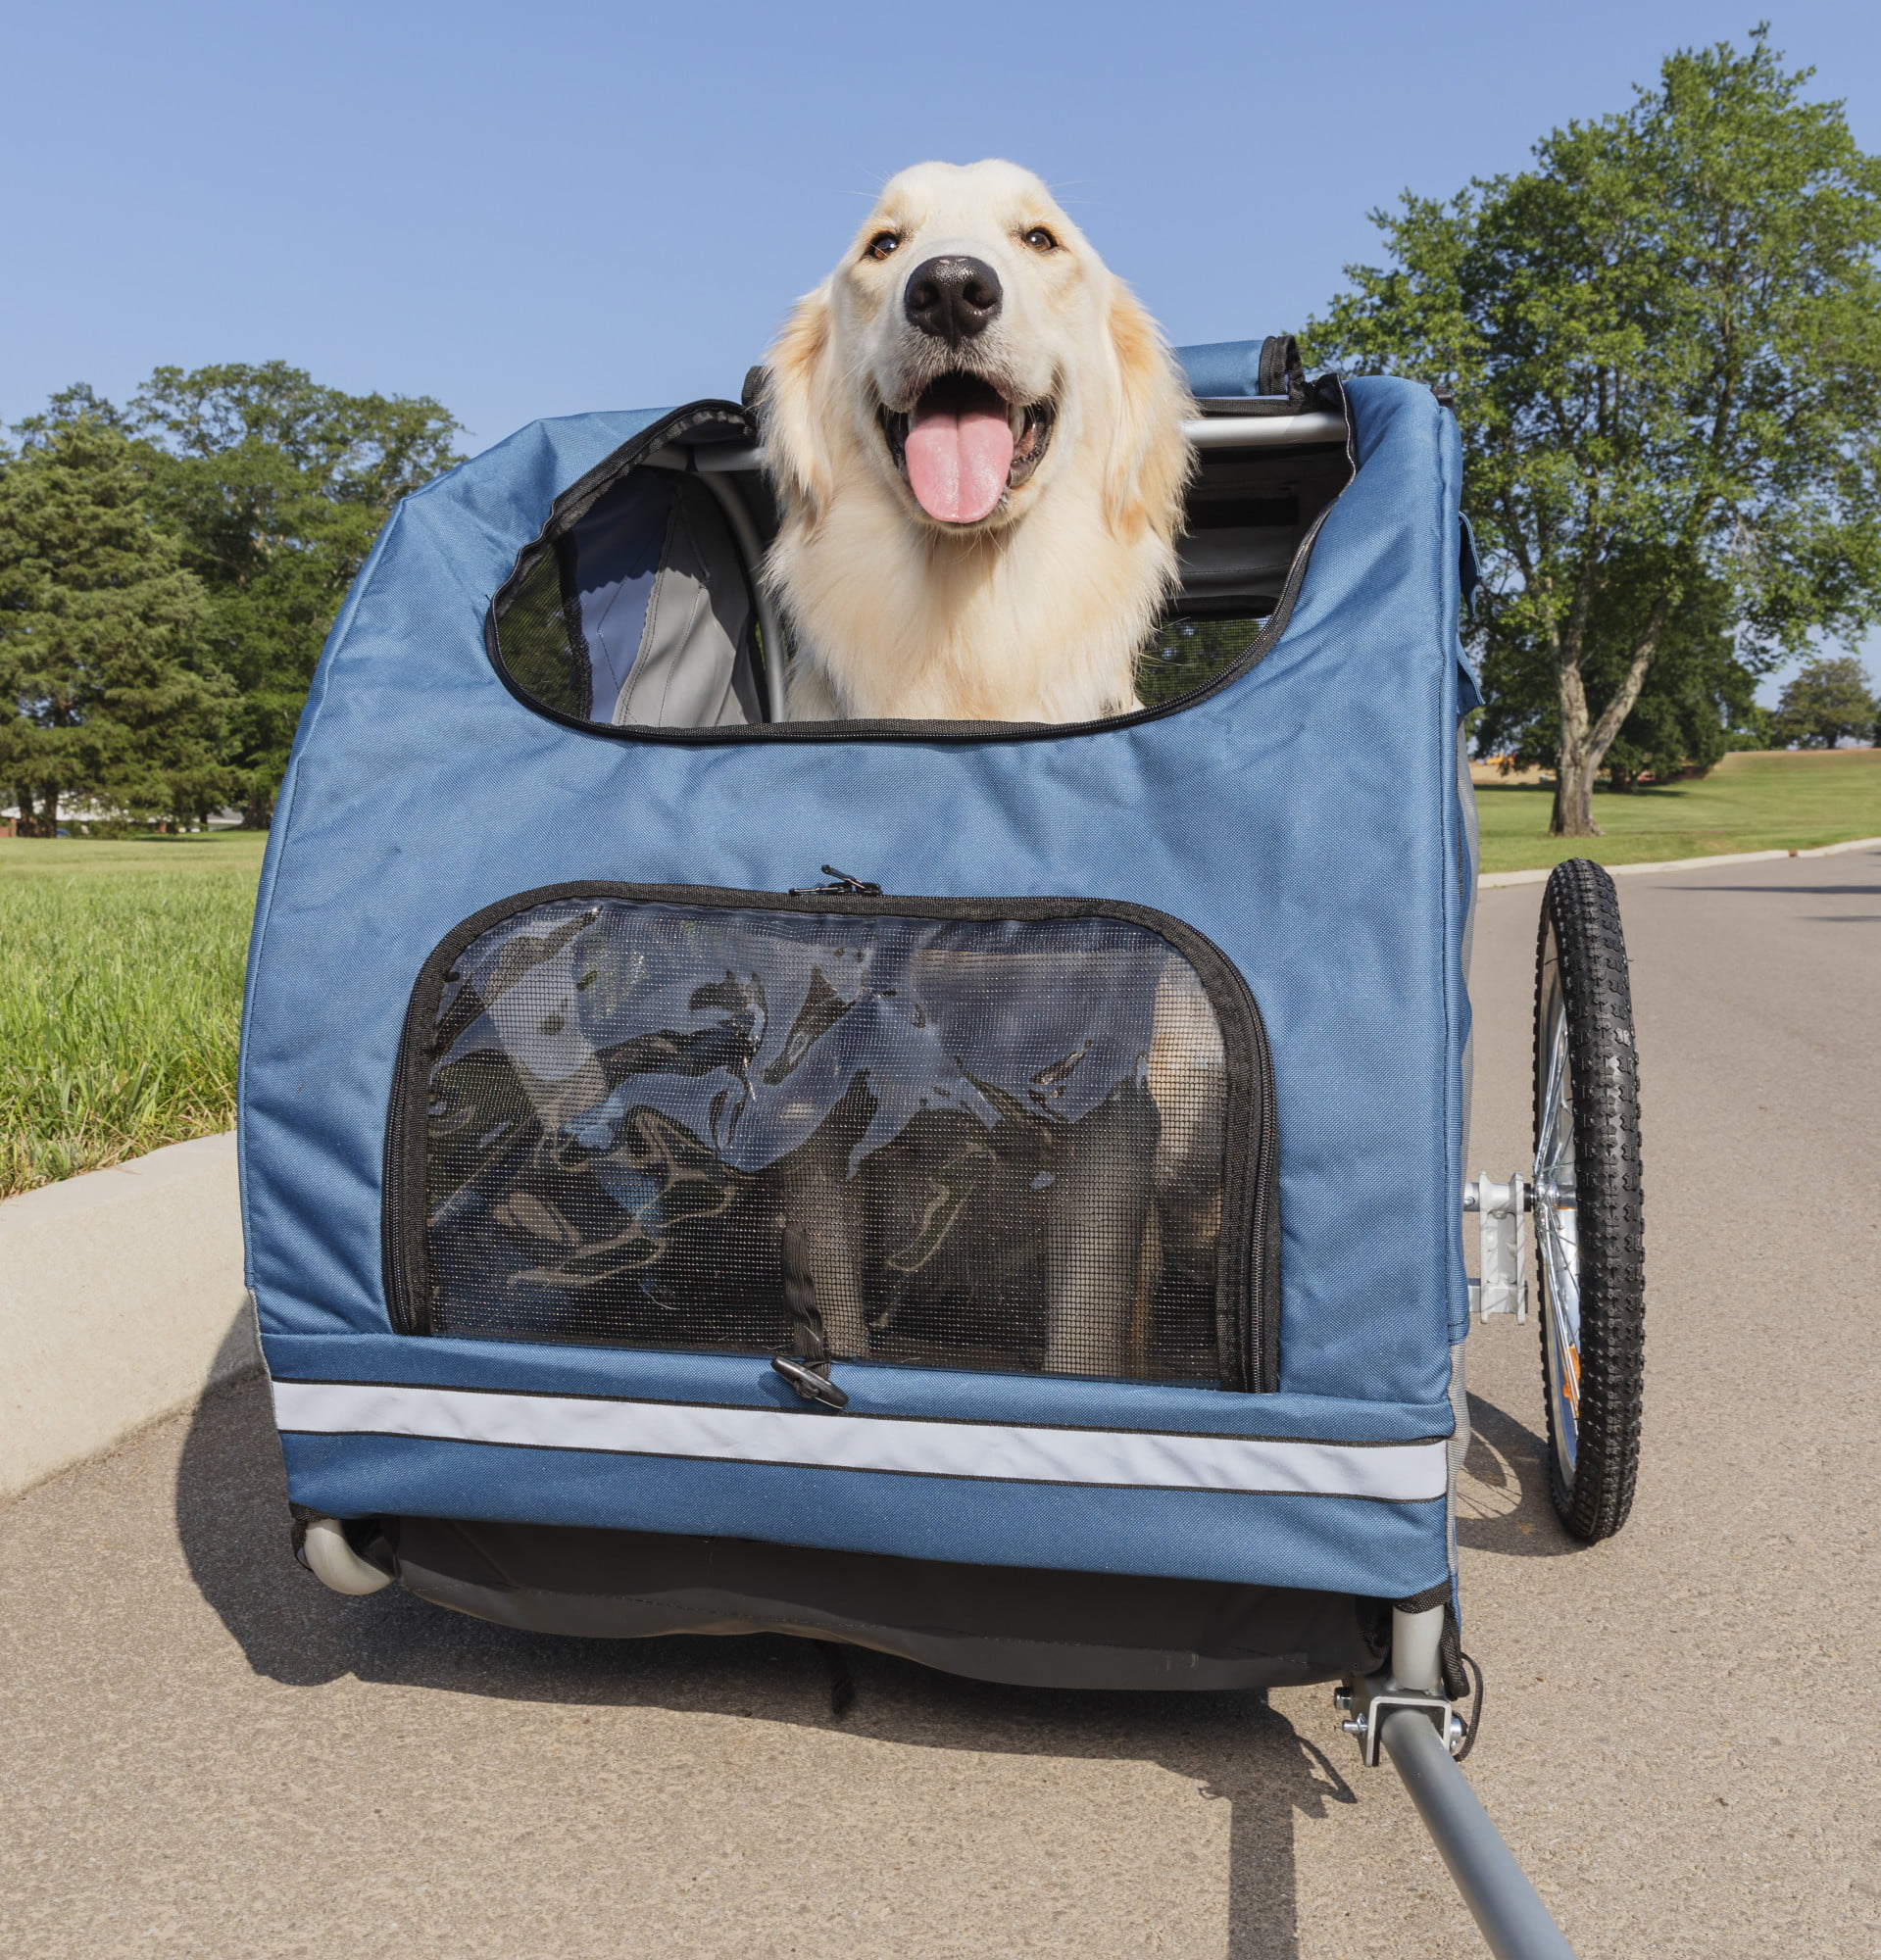 PetSafe Bicycle Trailer for Dogs, Includes Safety Tether & Pouches, Large, Blue - Walmart.com